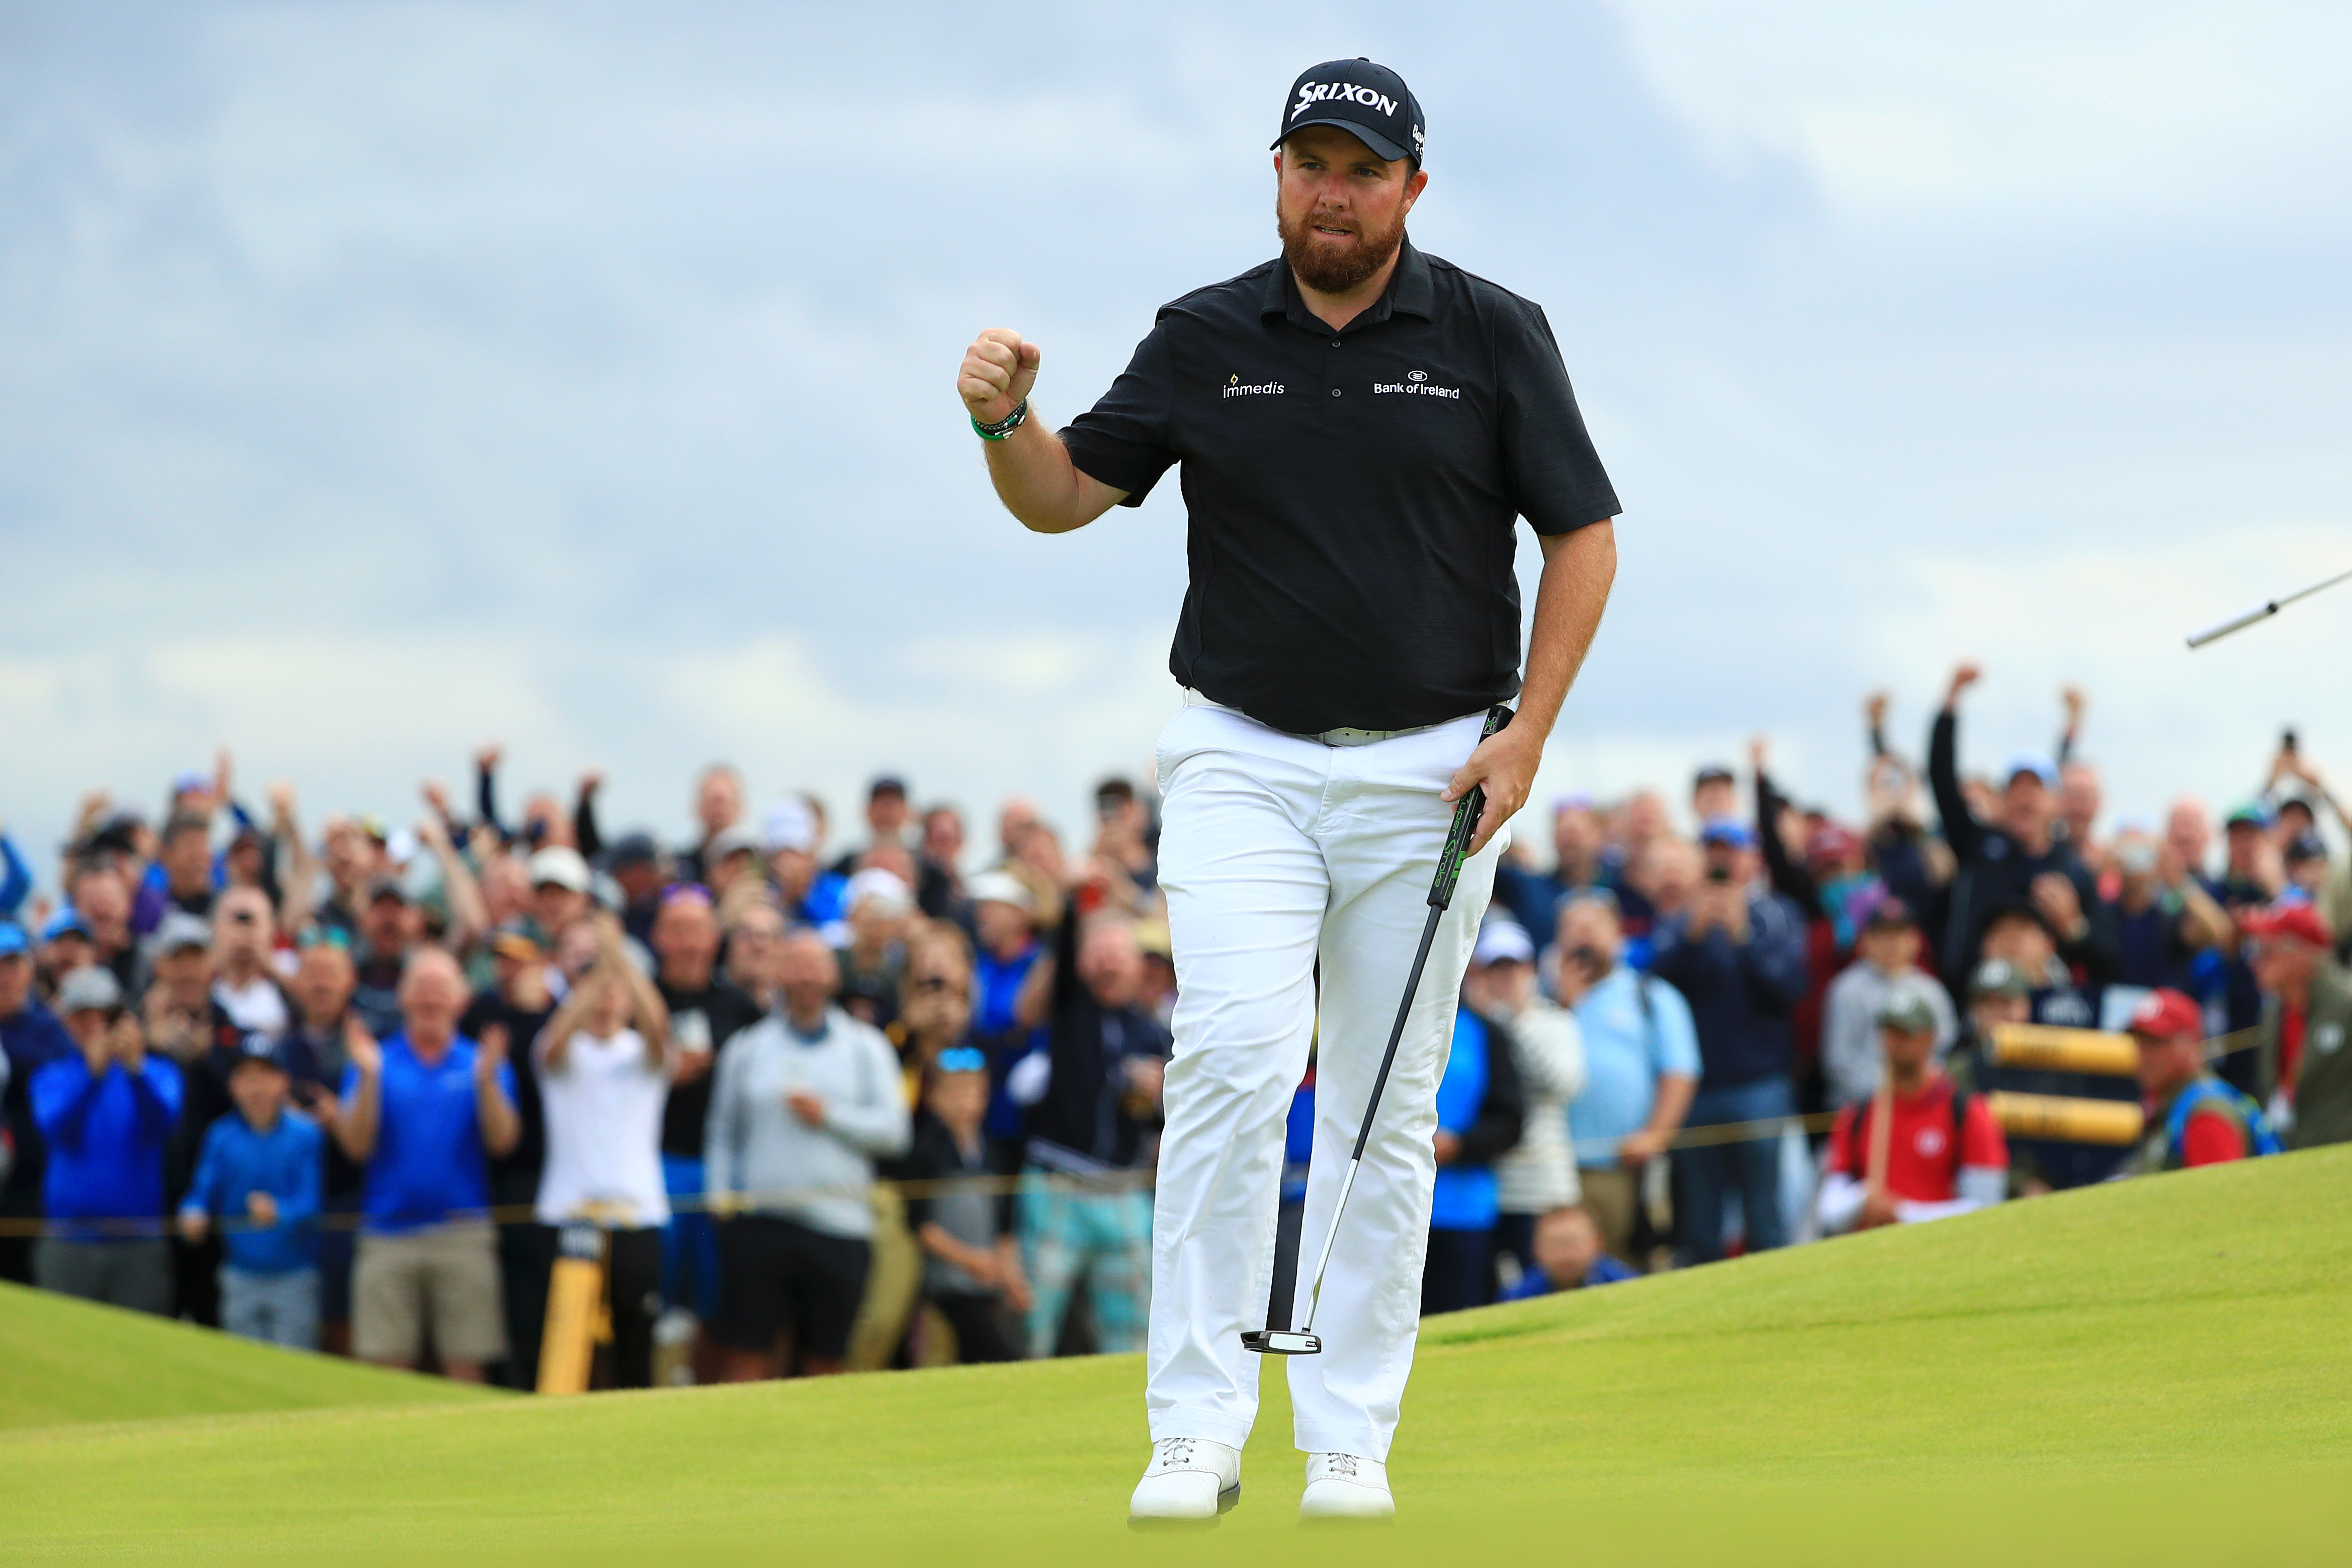 148th Open Championship - Day Three Getty Images